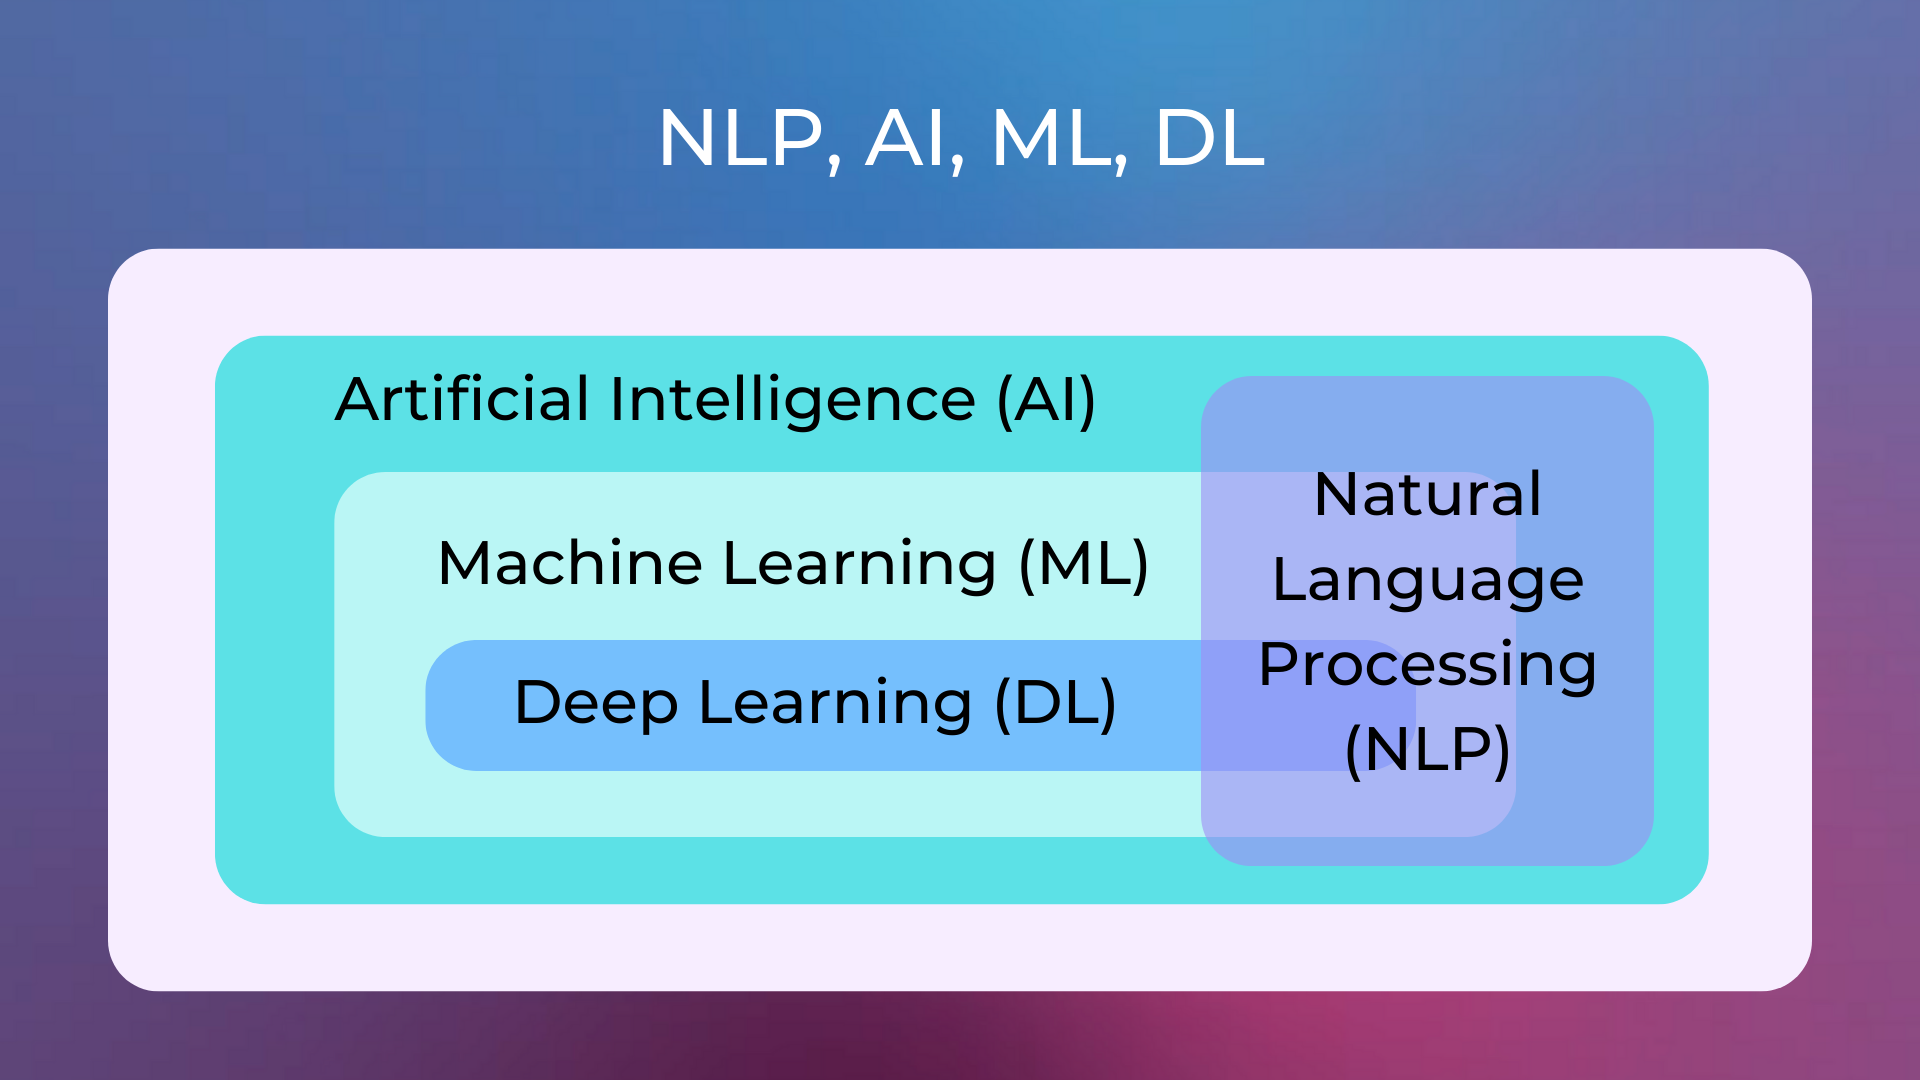 ../_images/nlp_ai_ml.png